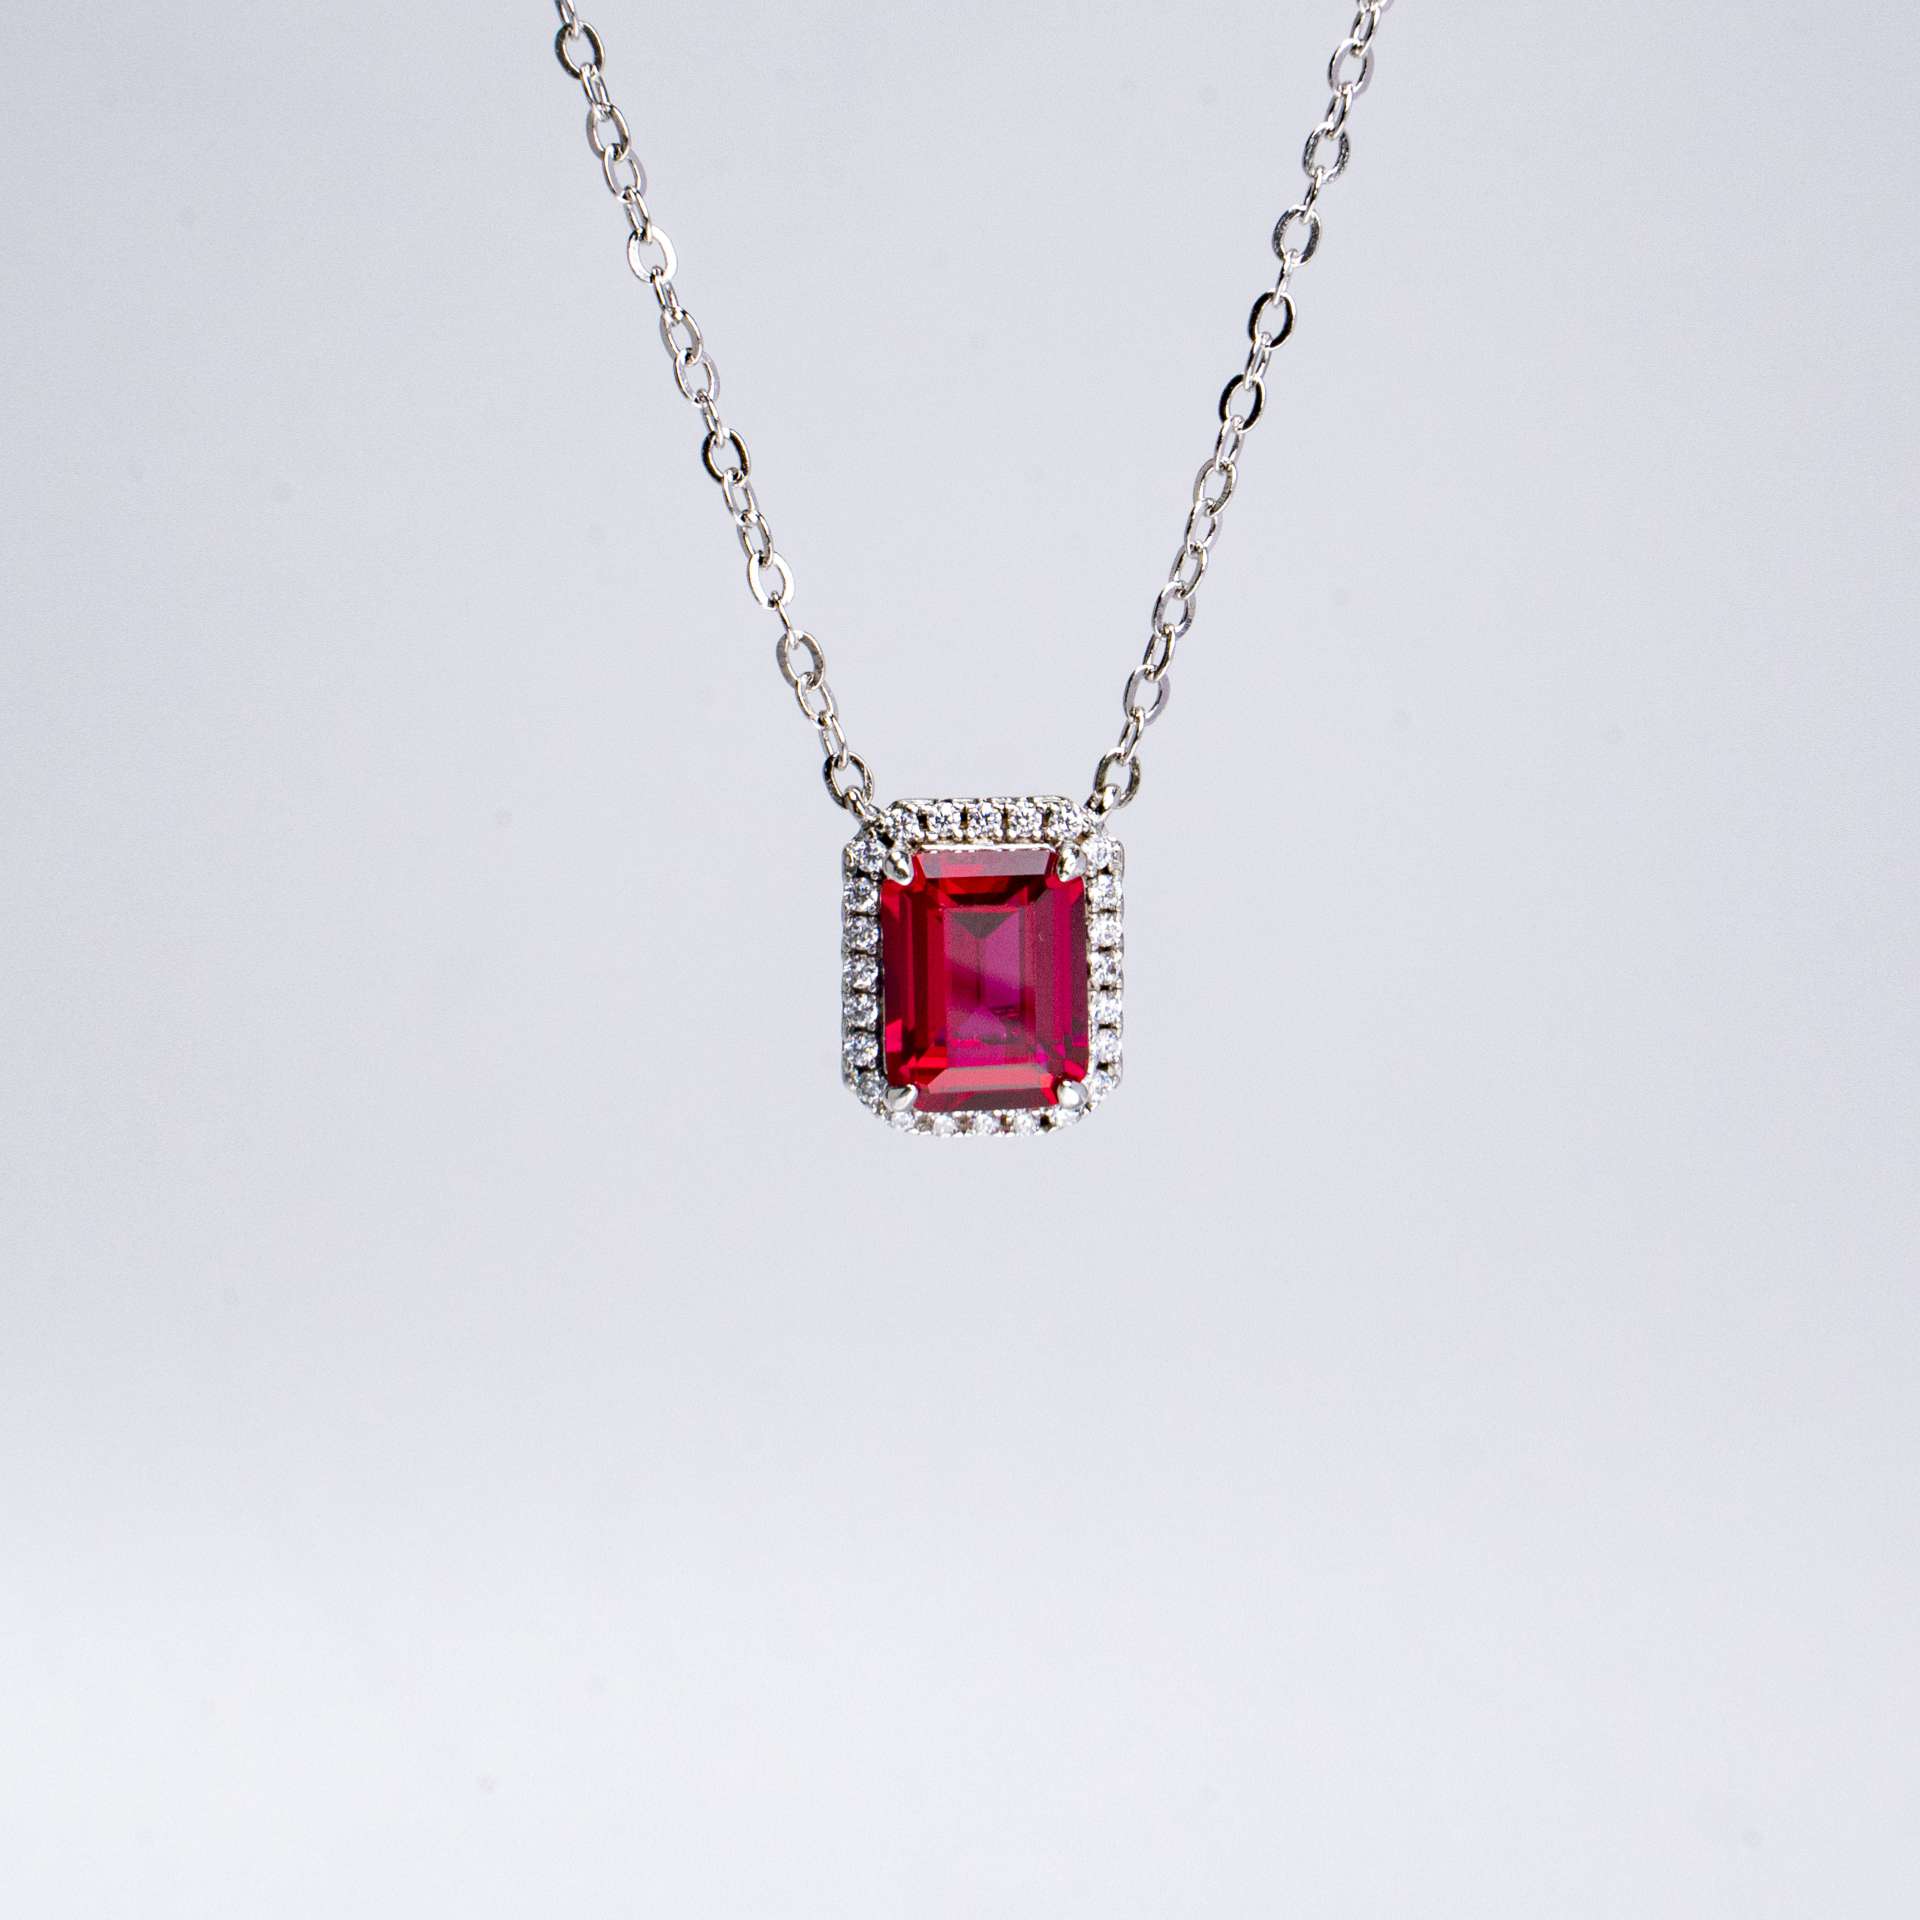 1.5CT Synthetic Ruby Emerald Cut Pendant Necklace